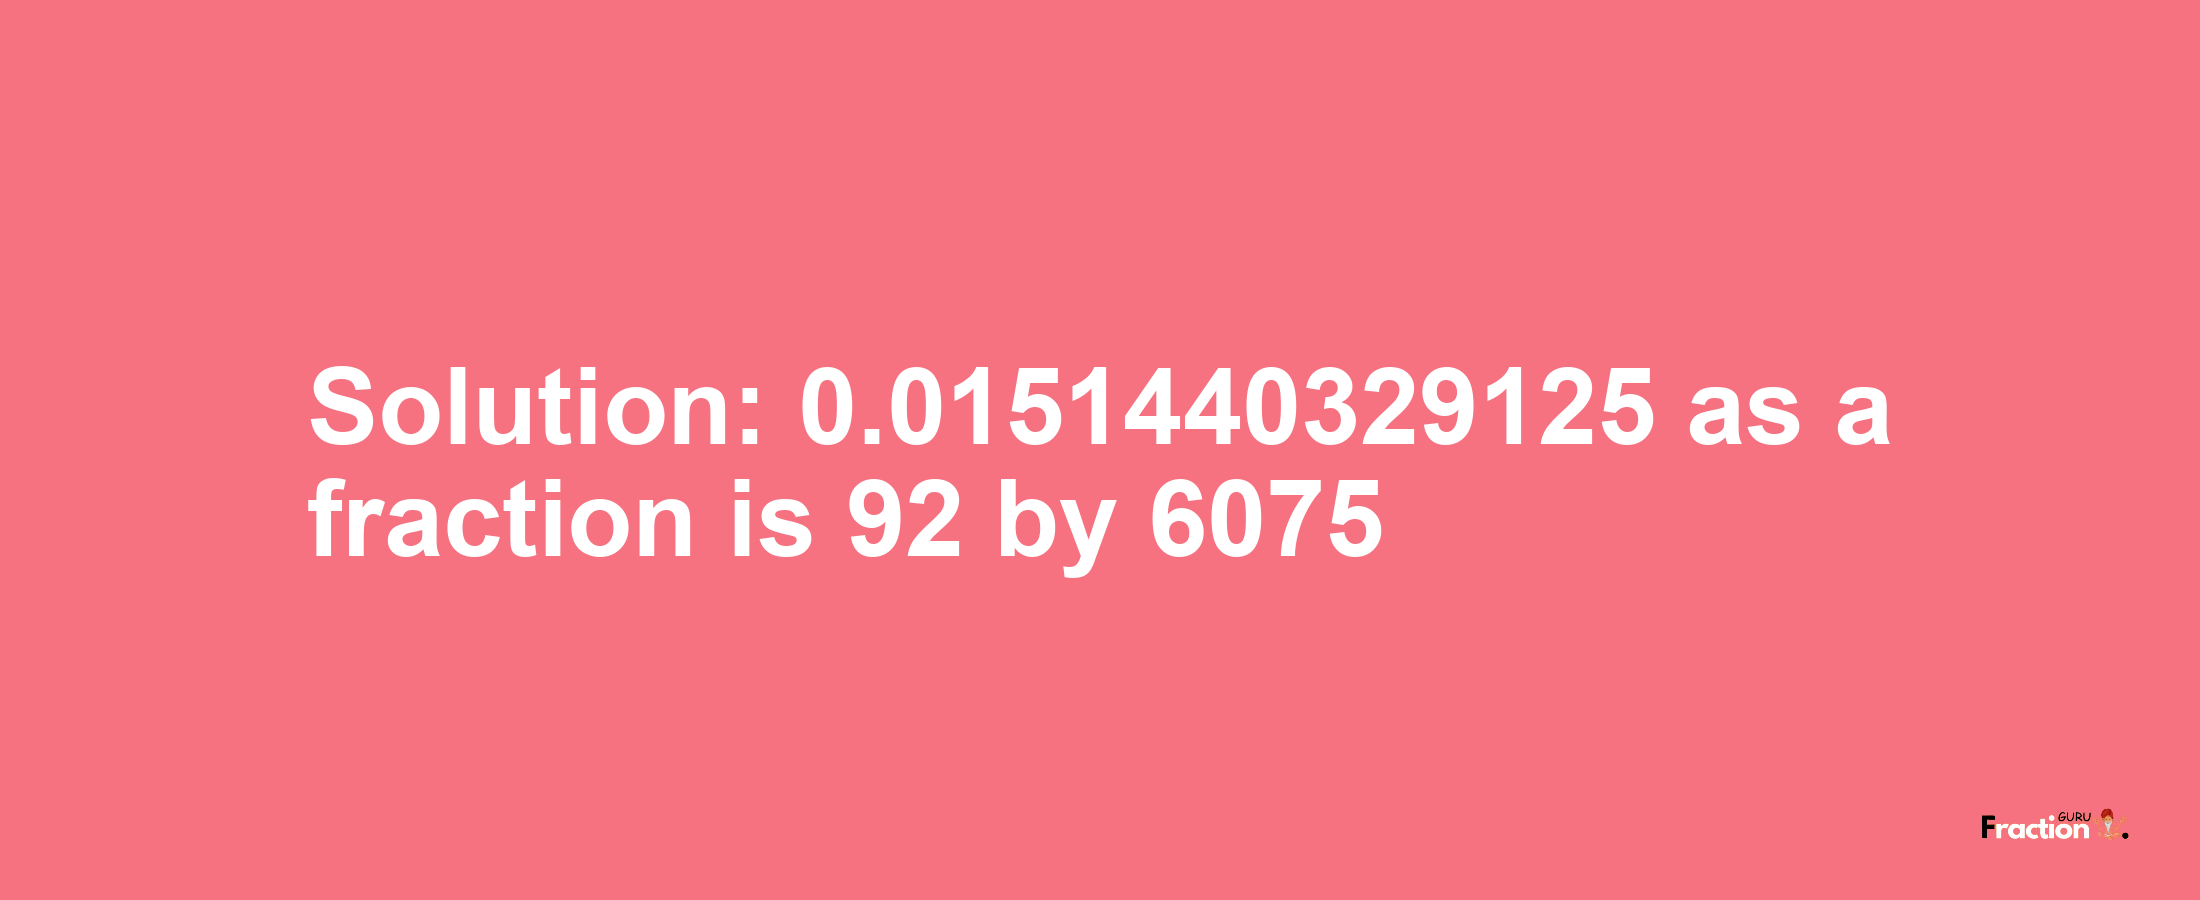 Solution:0.0151440329125 as a fraction is 92/6075